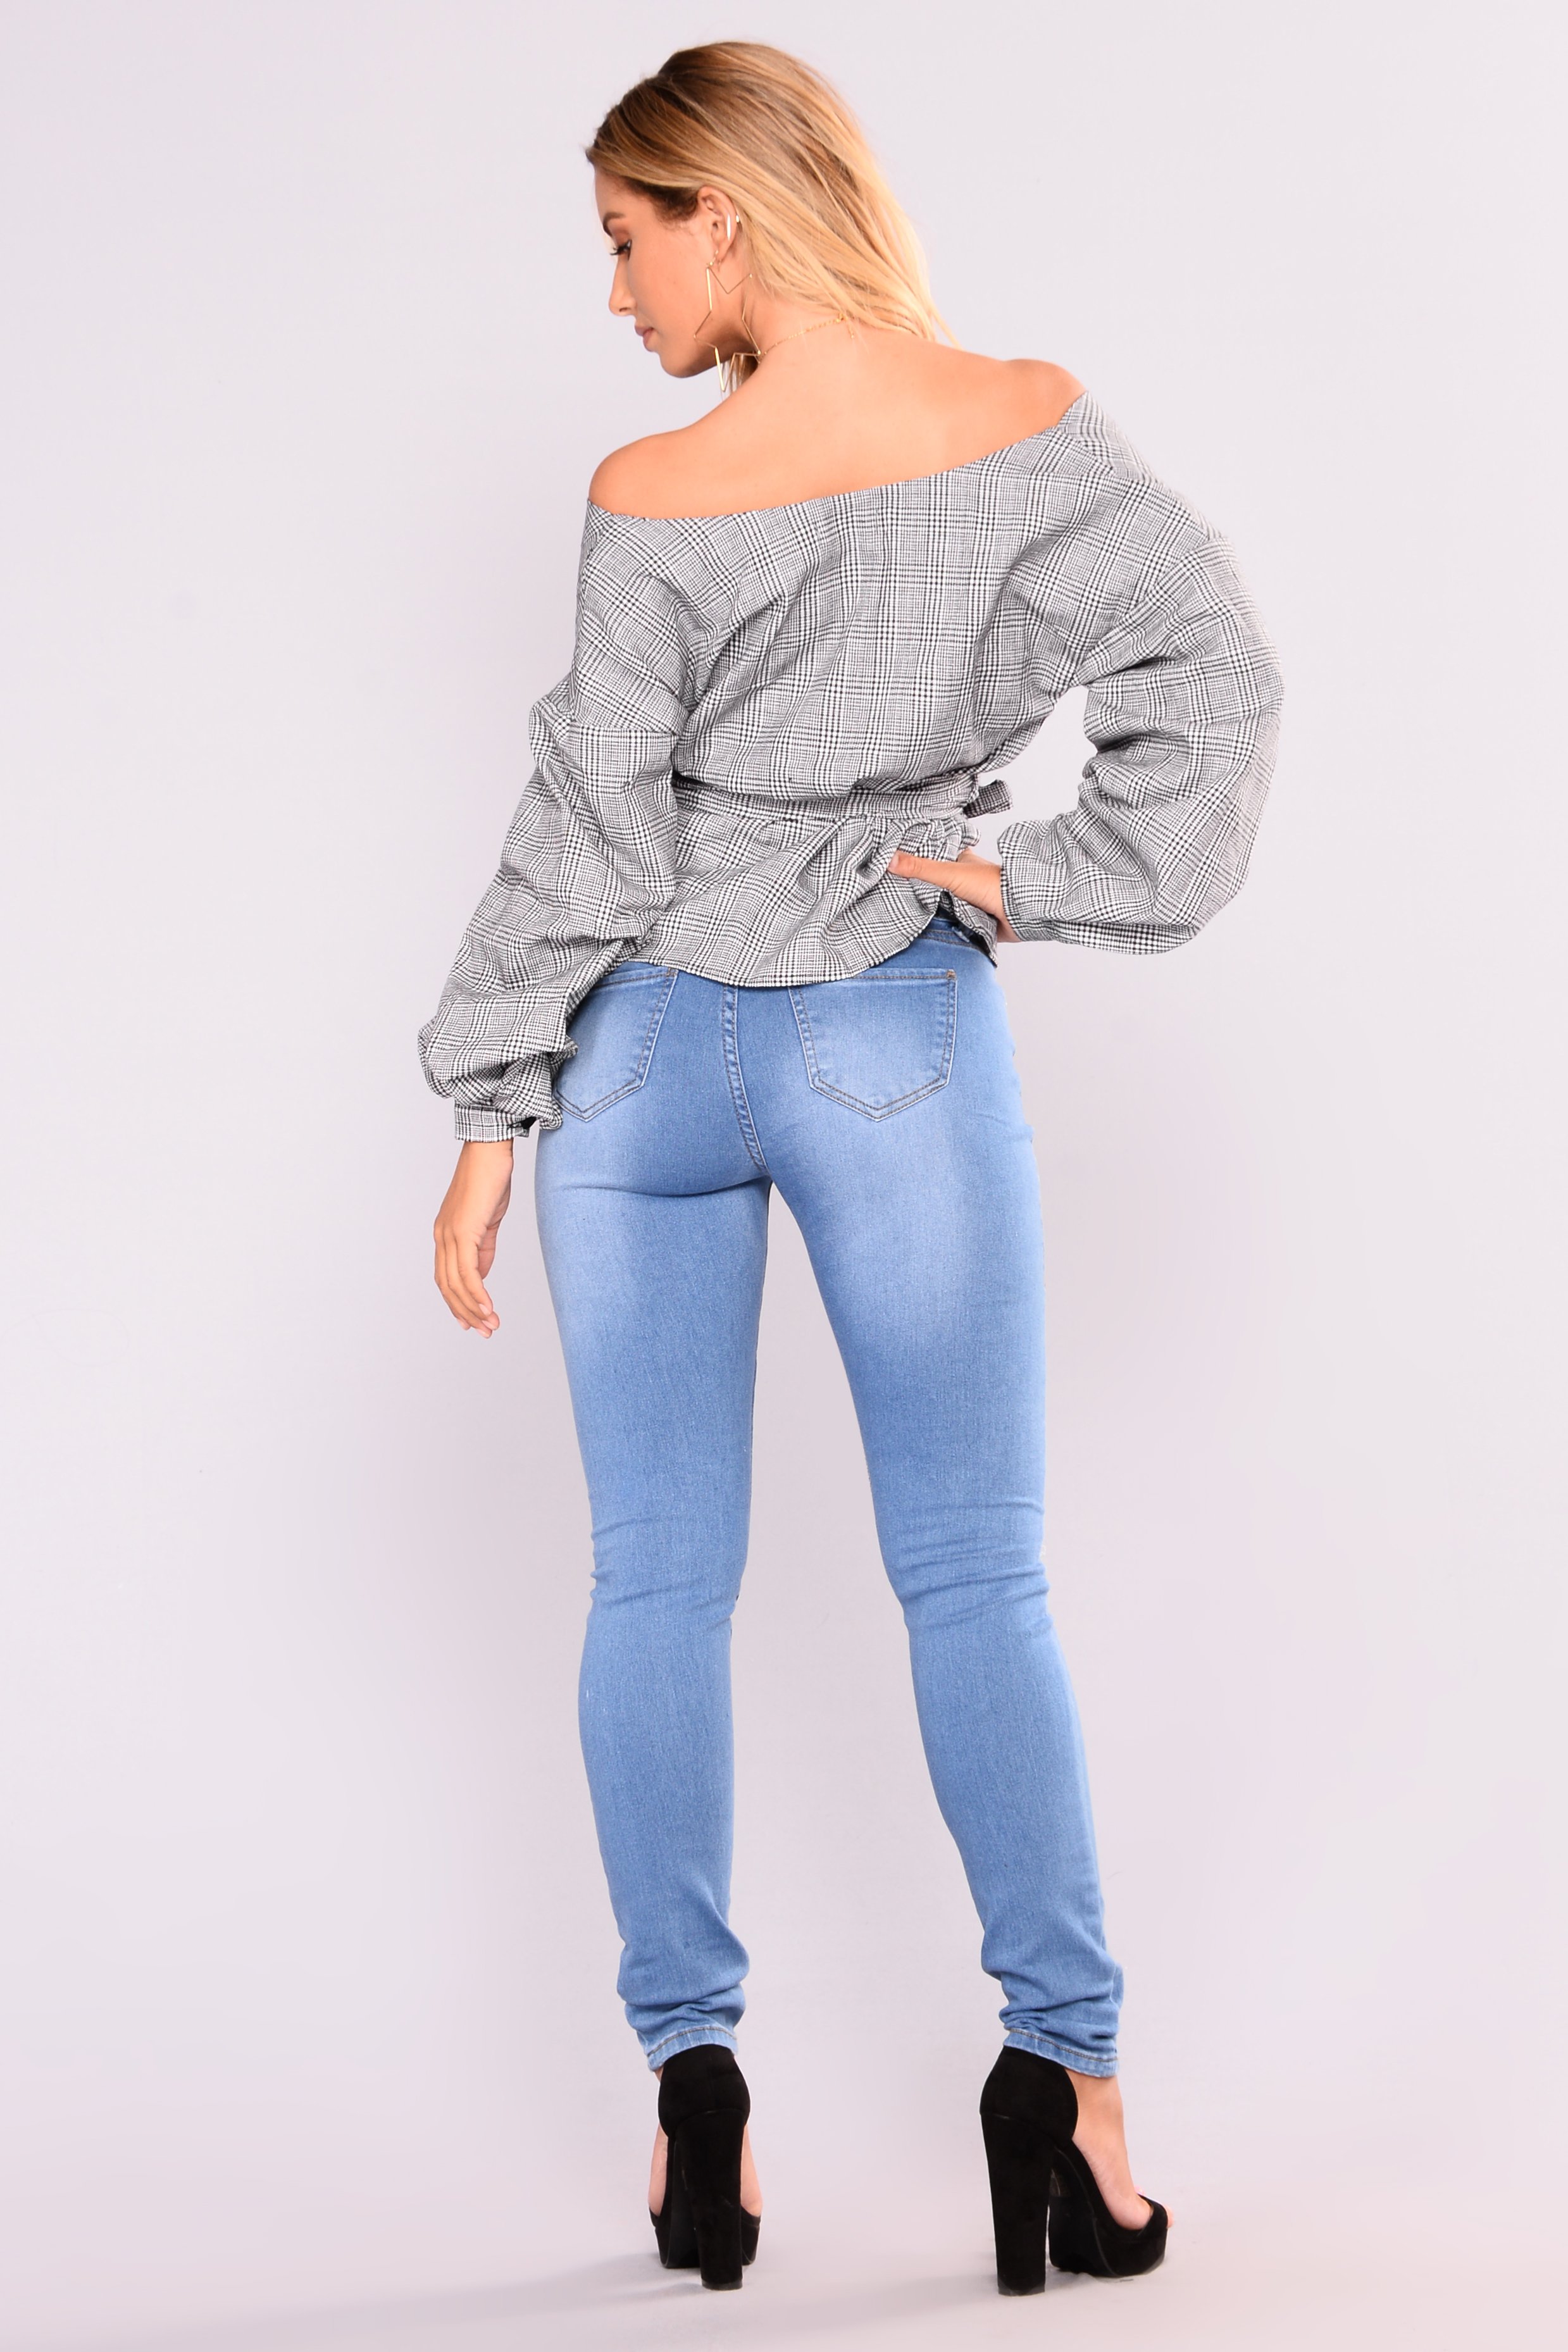 Beauty In Everything Skinny Jeans - Light Blue Wash